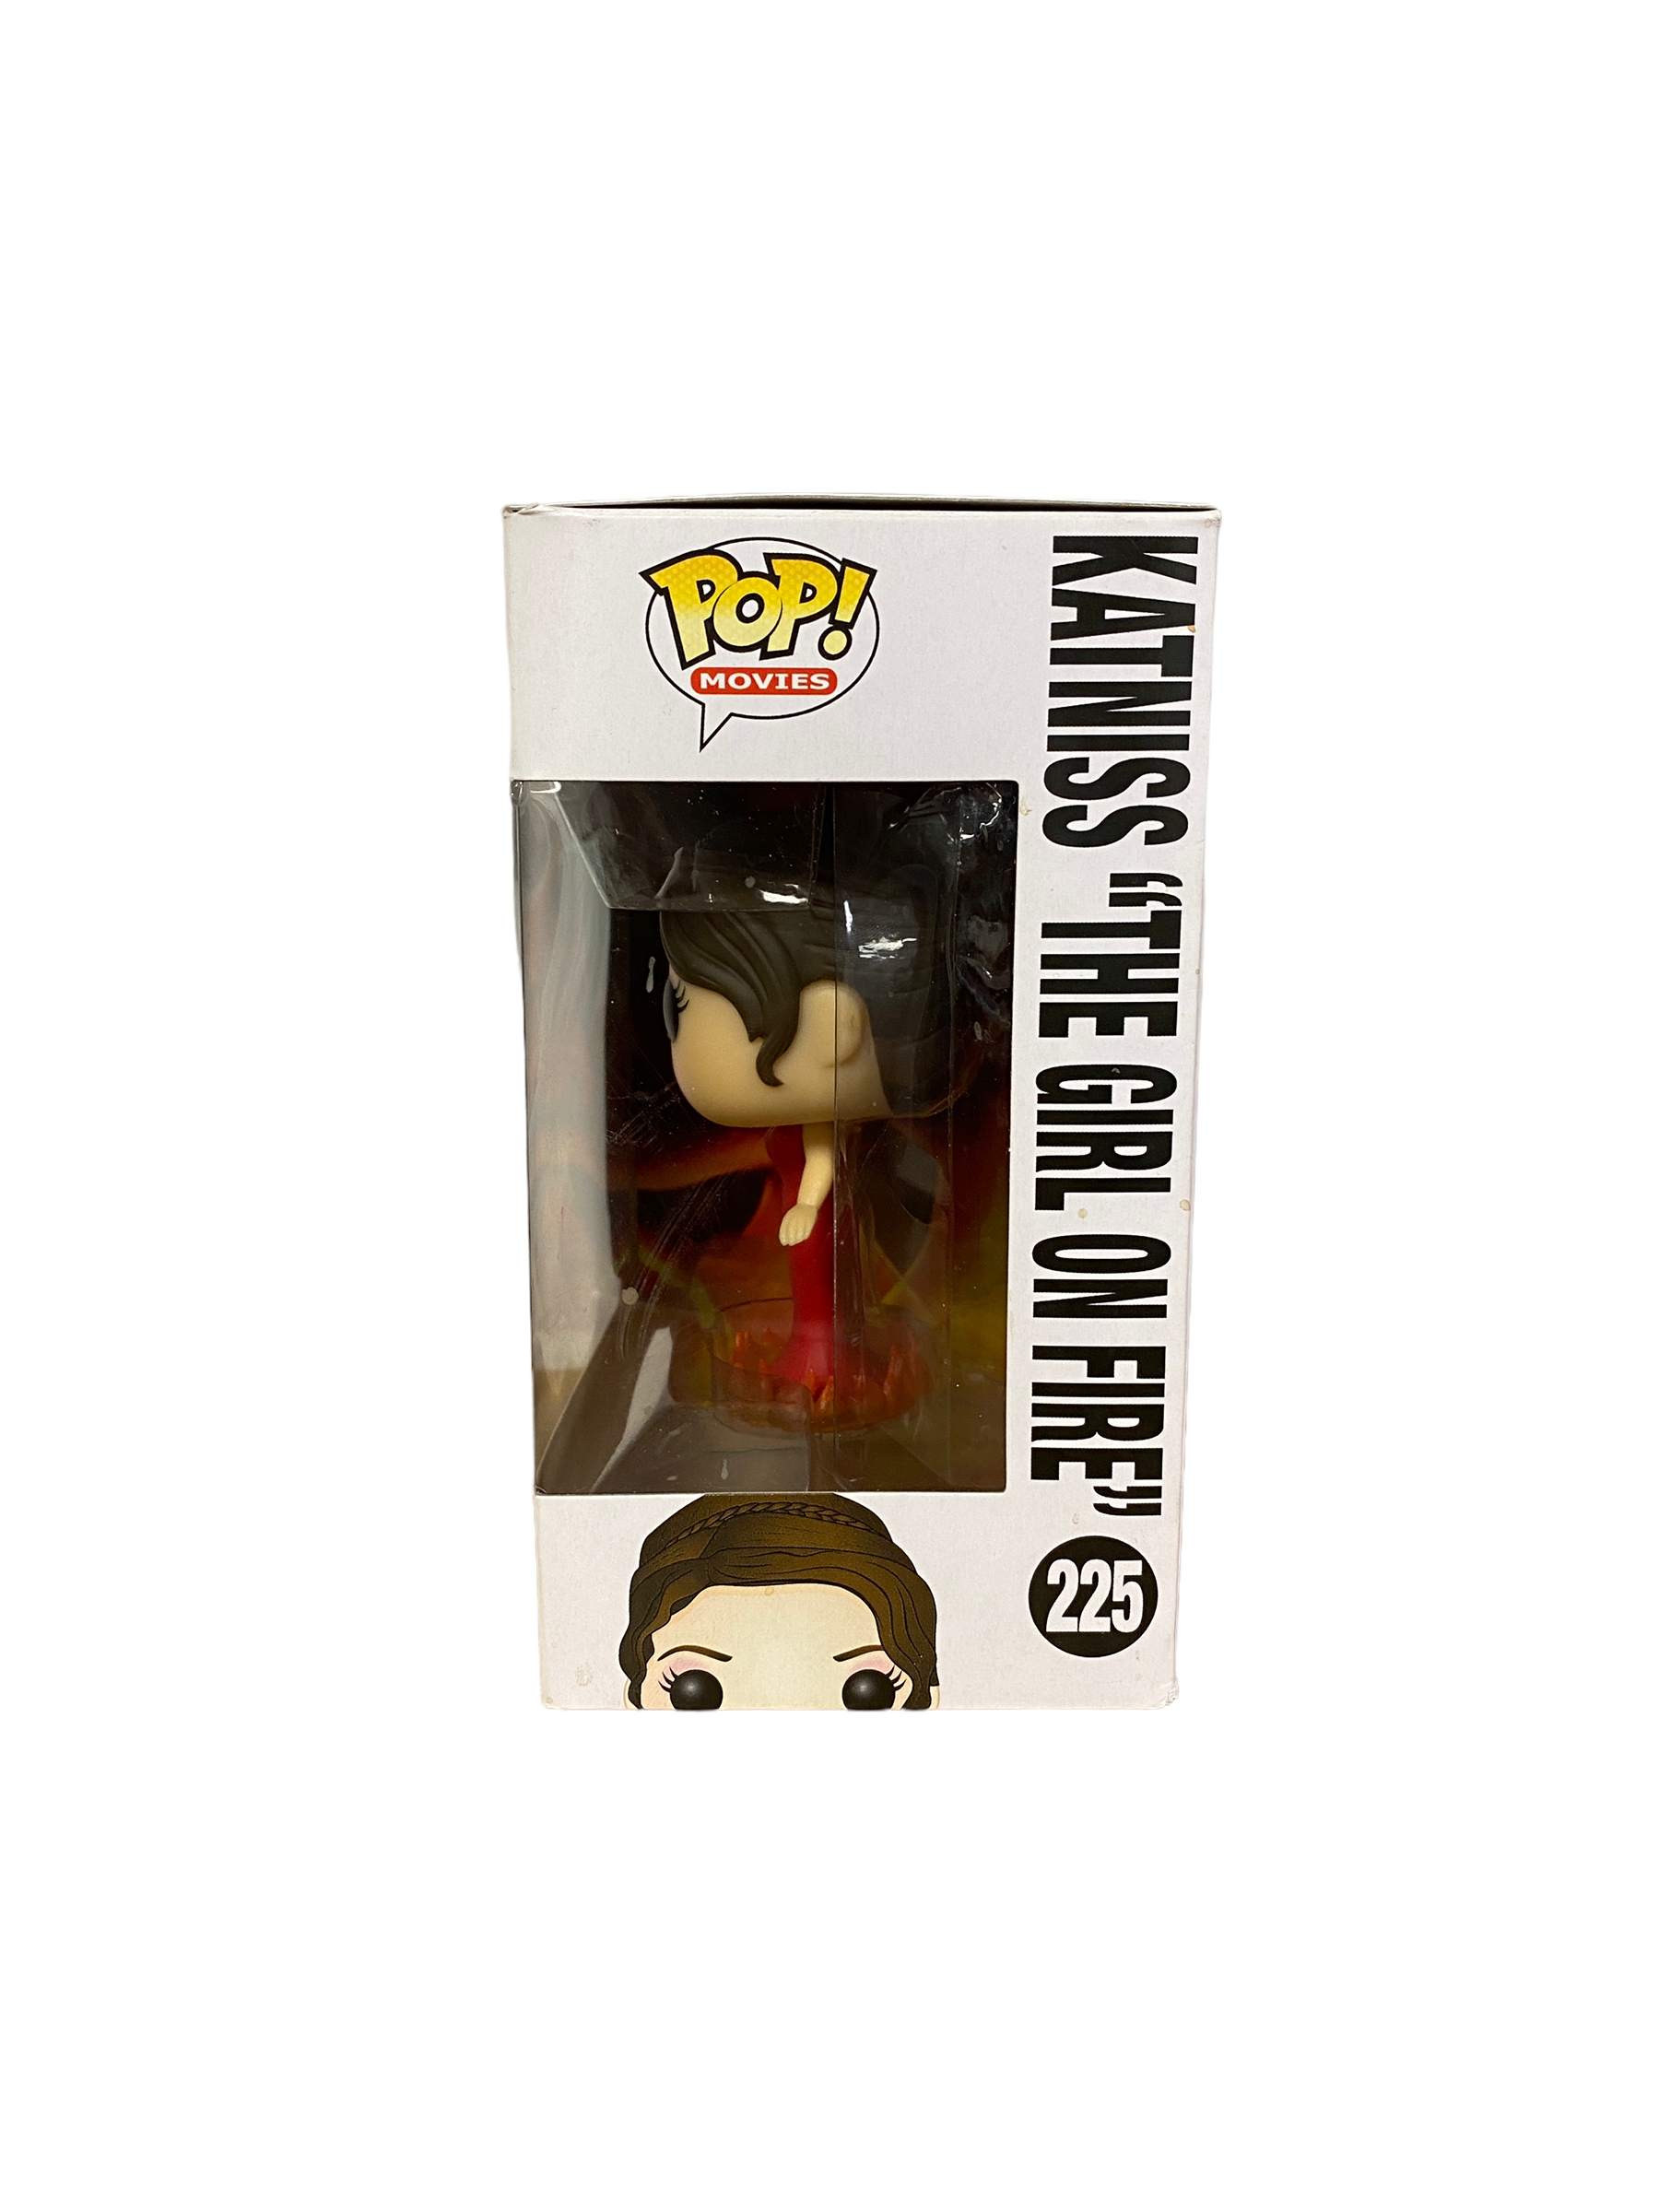 Katniss "The Girl On Fire" #225 Funko Pop! - The World Of The Hunger Games - 2015 Pop! - Condition 8/10